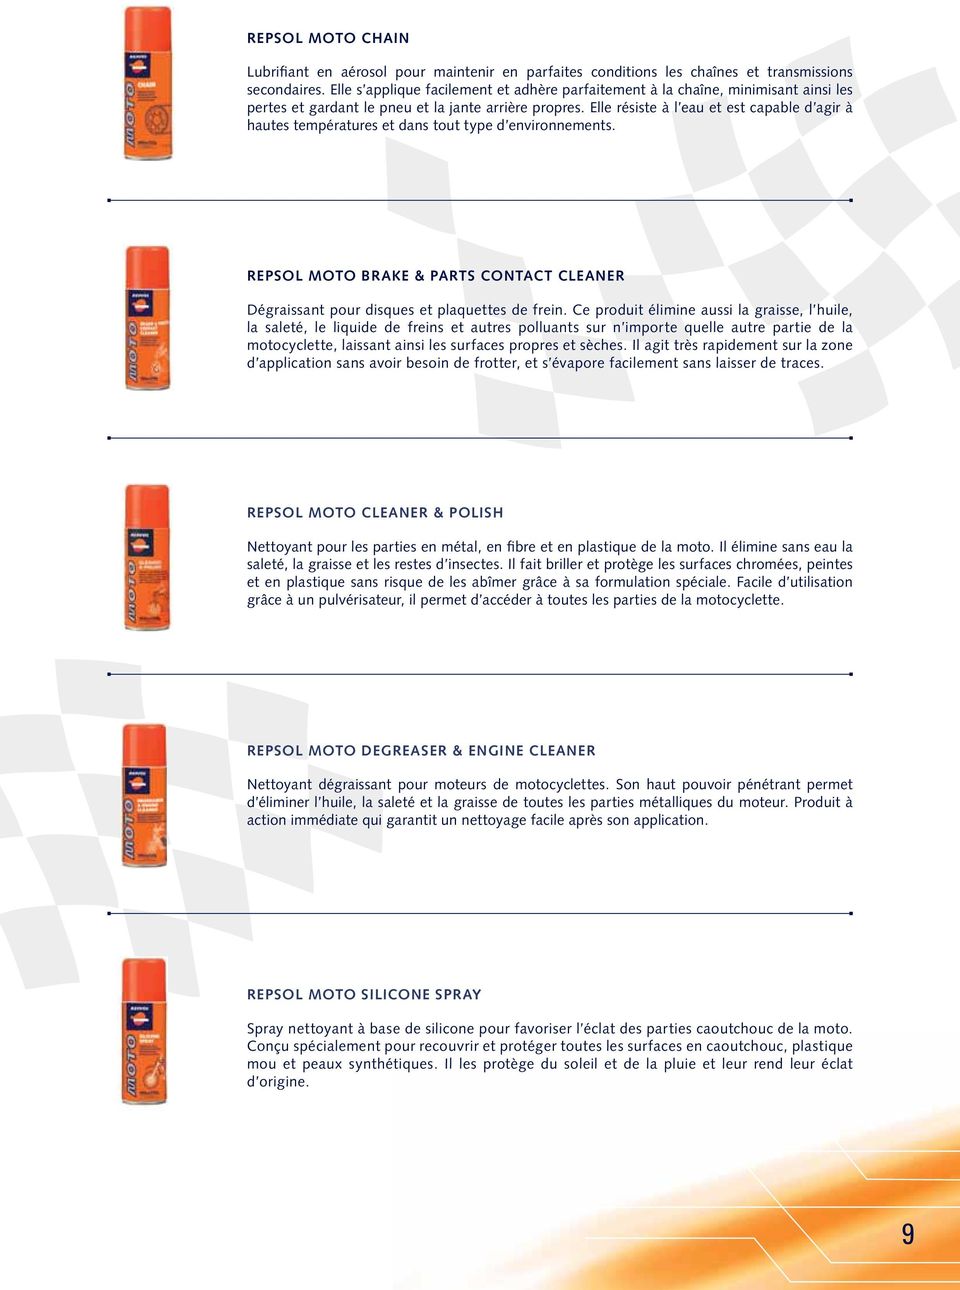 REPSOL MOTO BRAKE & PARTS CONTACT CLEANER REPSOL MOTO CLEANER & POLISH REPSOL MOTO DEGREASER & ENGINE CLEANER action